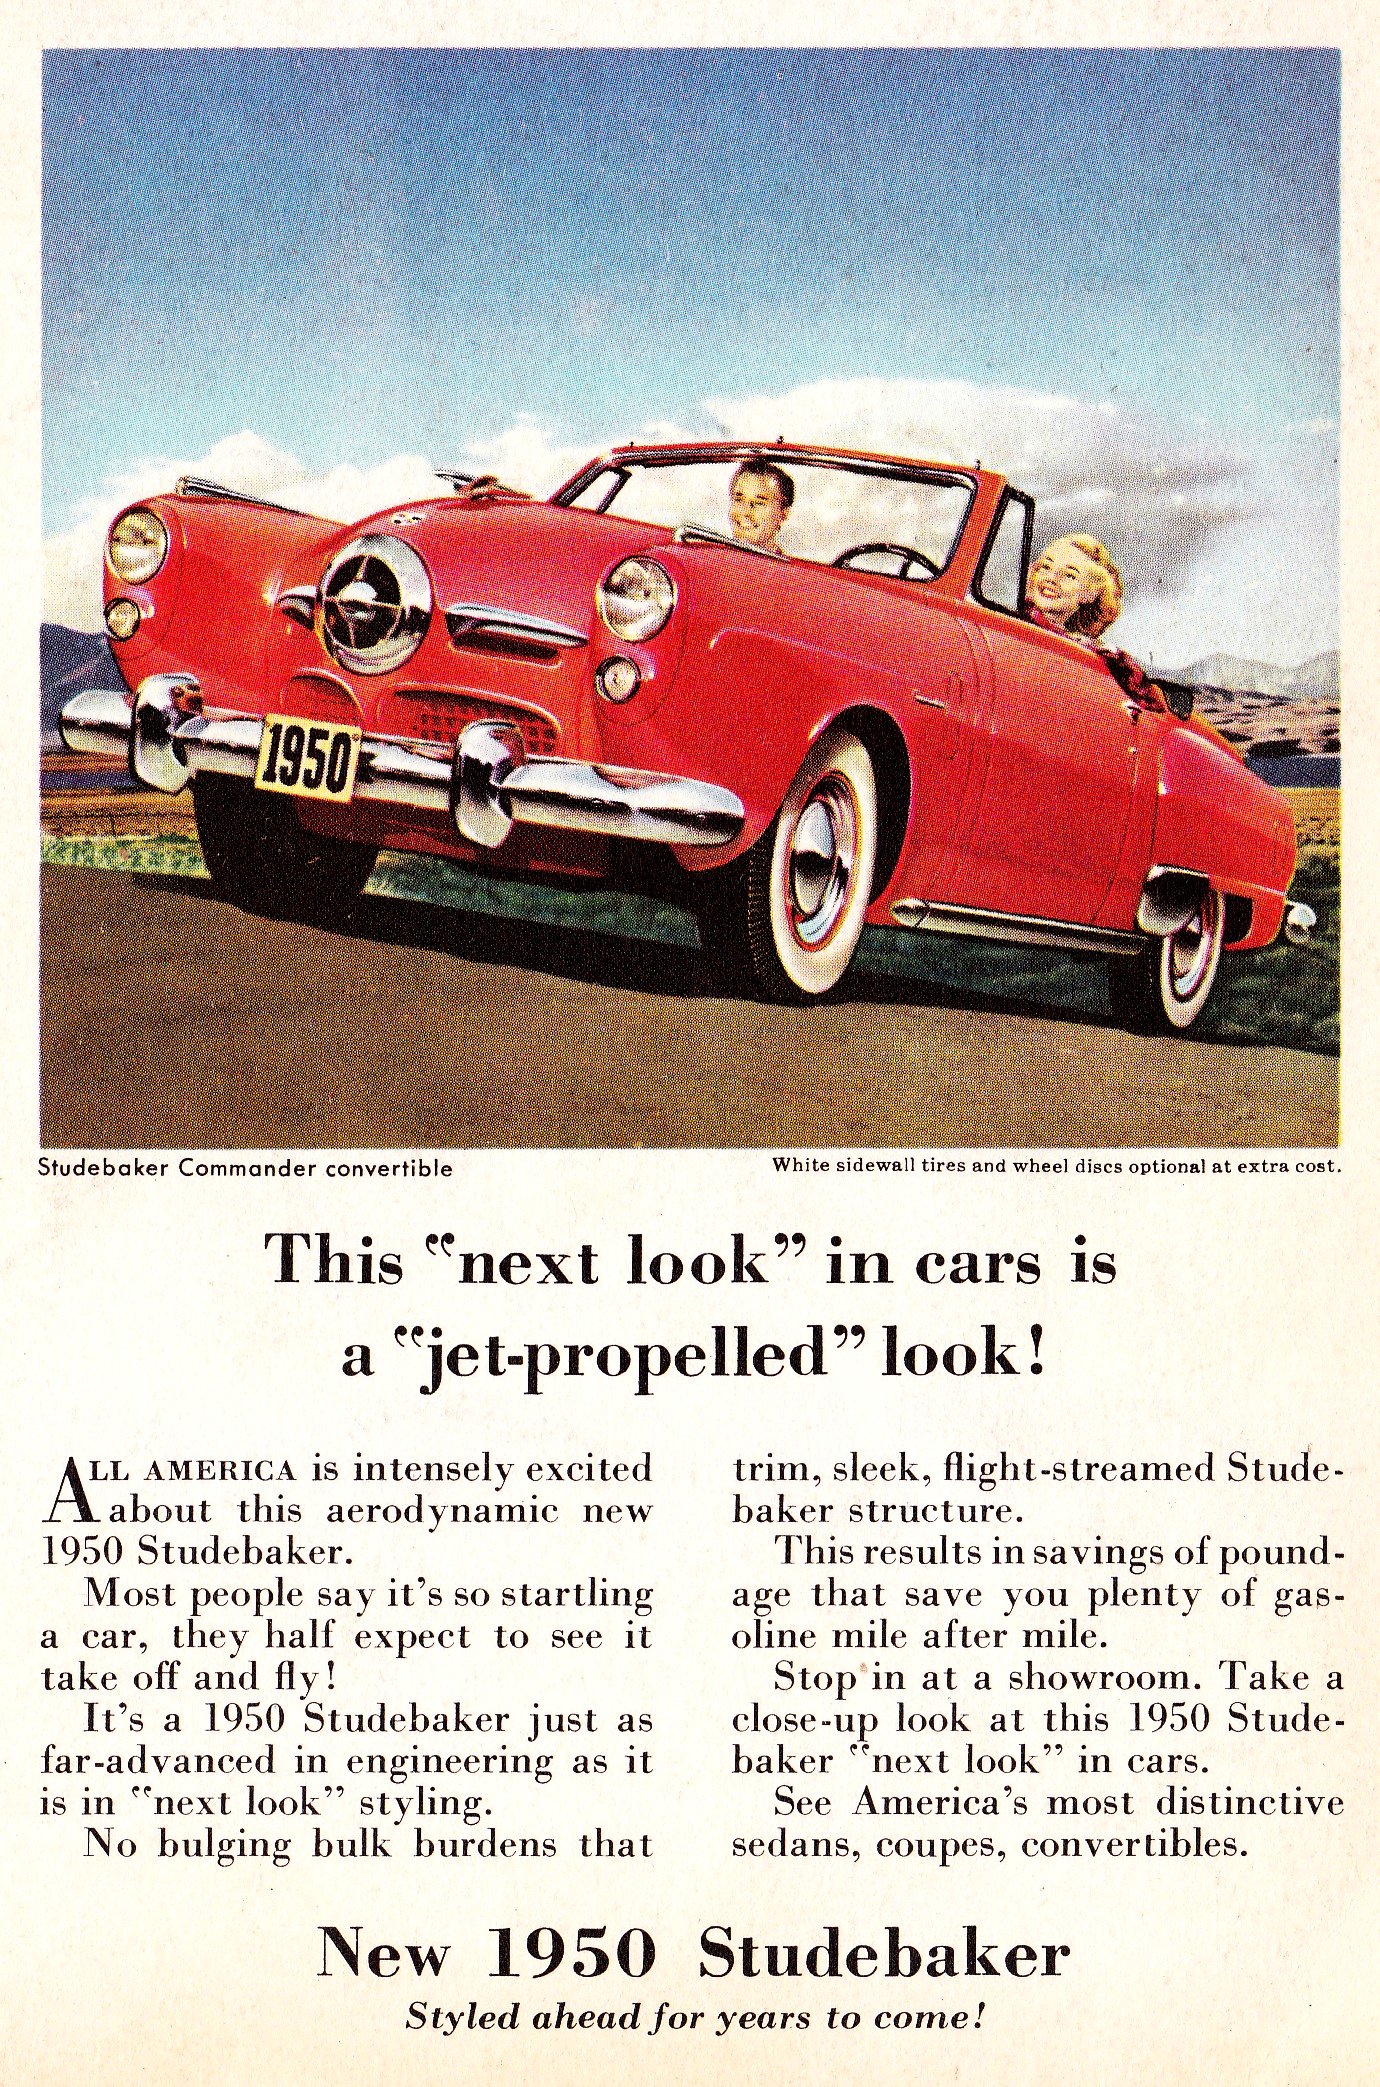 1950 Studebaker Commander Convertible - published in 'Coronet' - January 1950